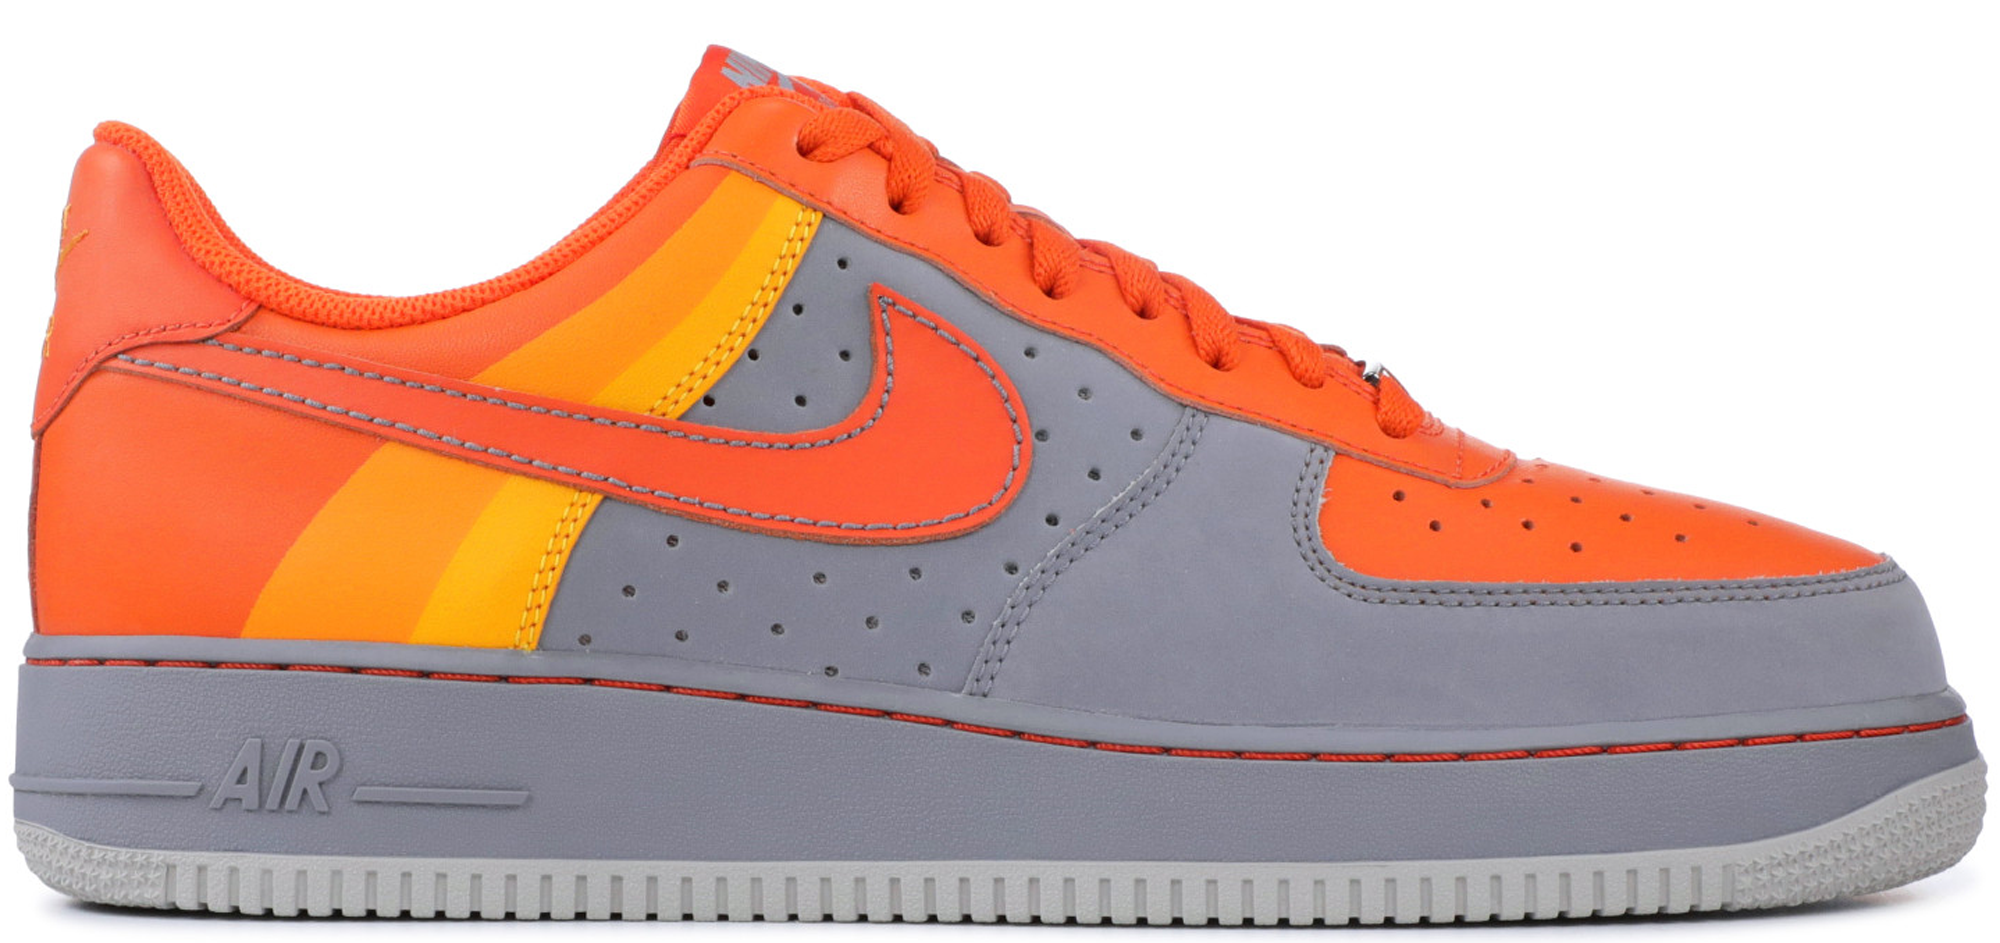 Nike Air Force 1 Low Barkley Pack 